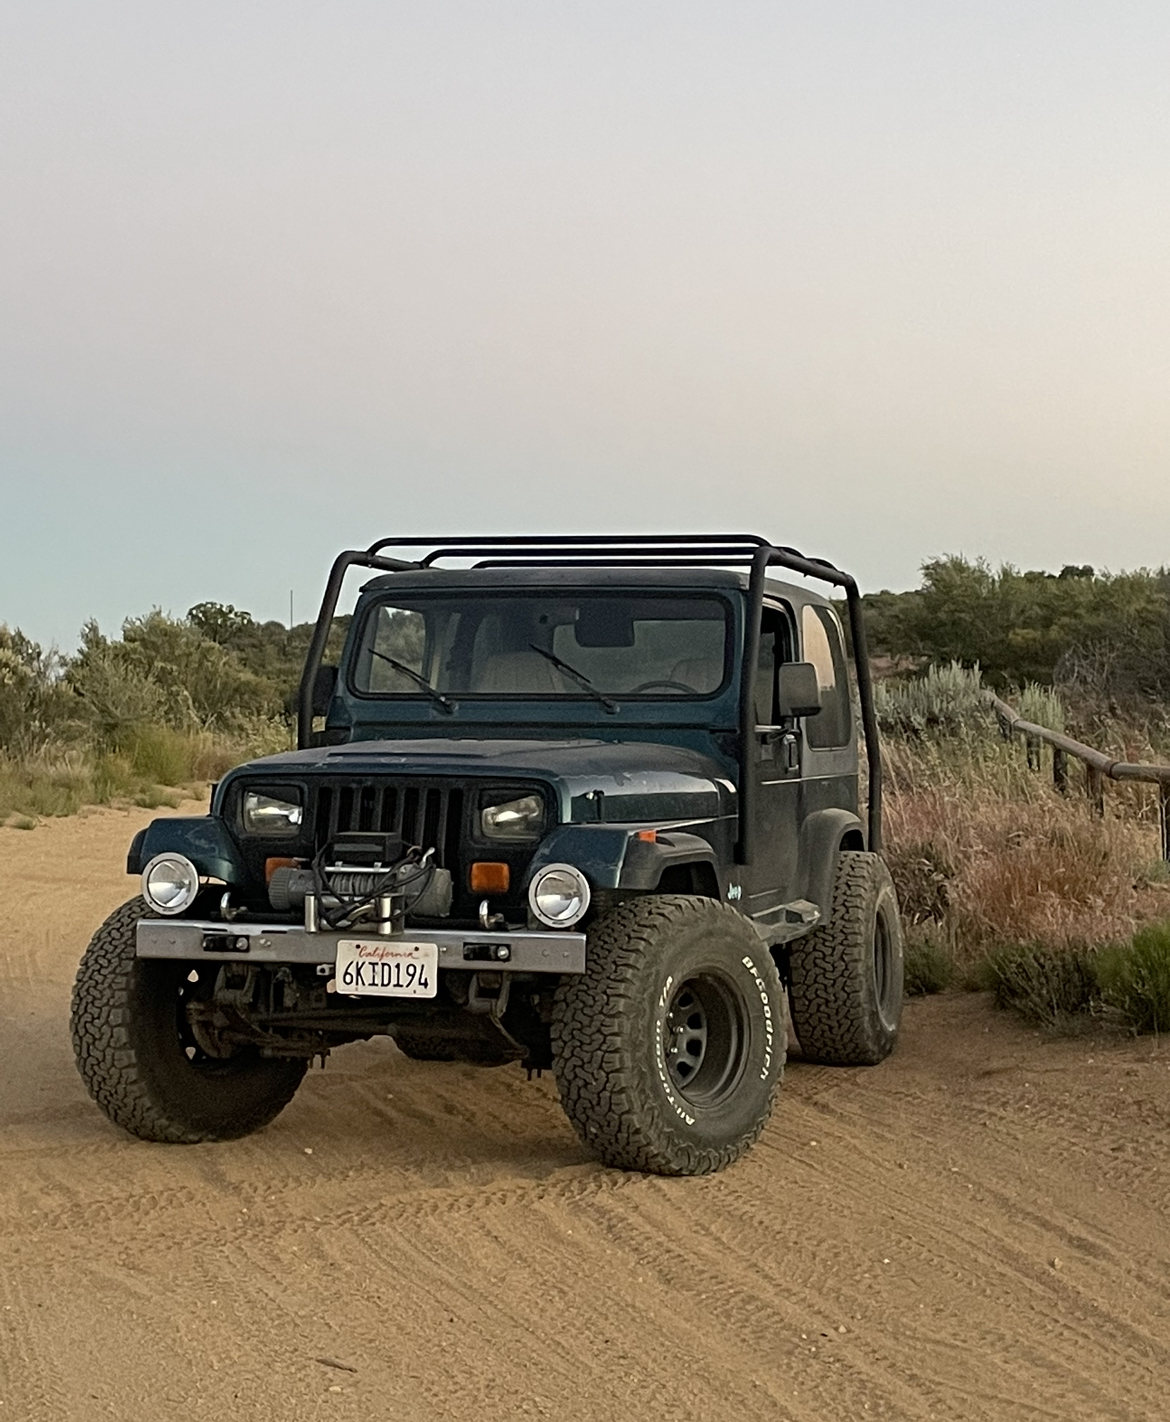 Used Jeep Wrangler for Sale Near Me Under $10,000 in San Diego, CA -  Autotrader